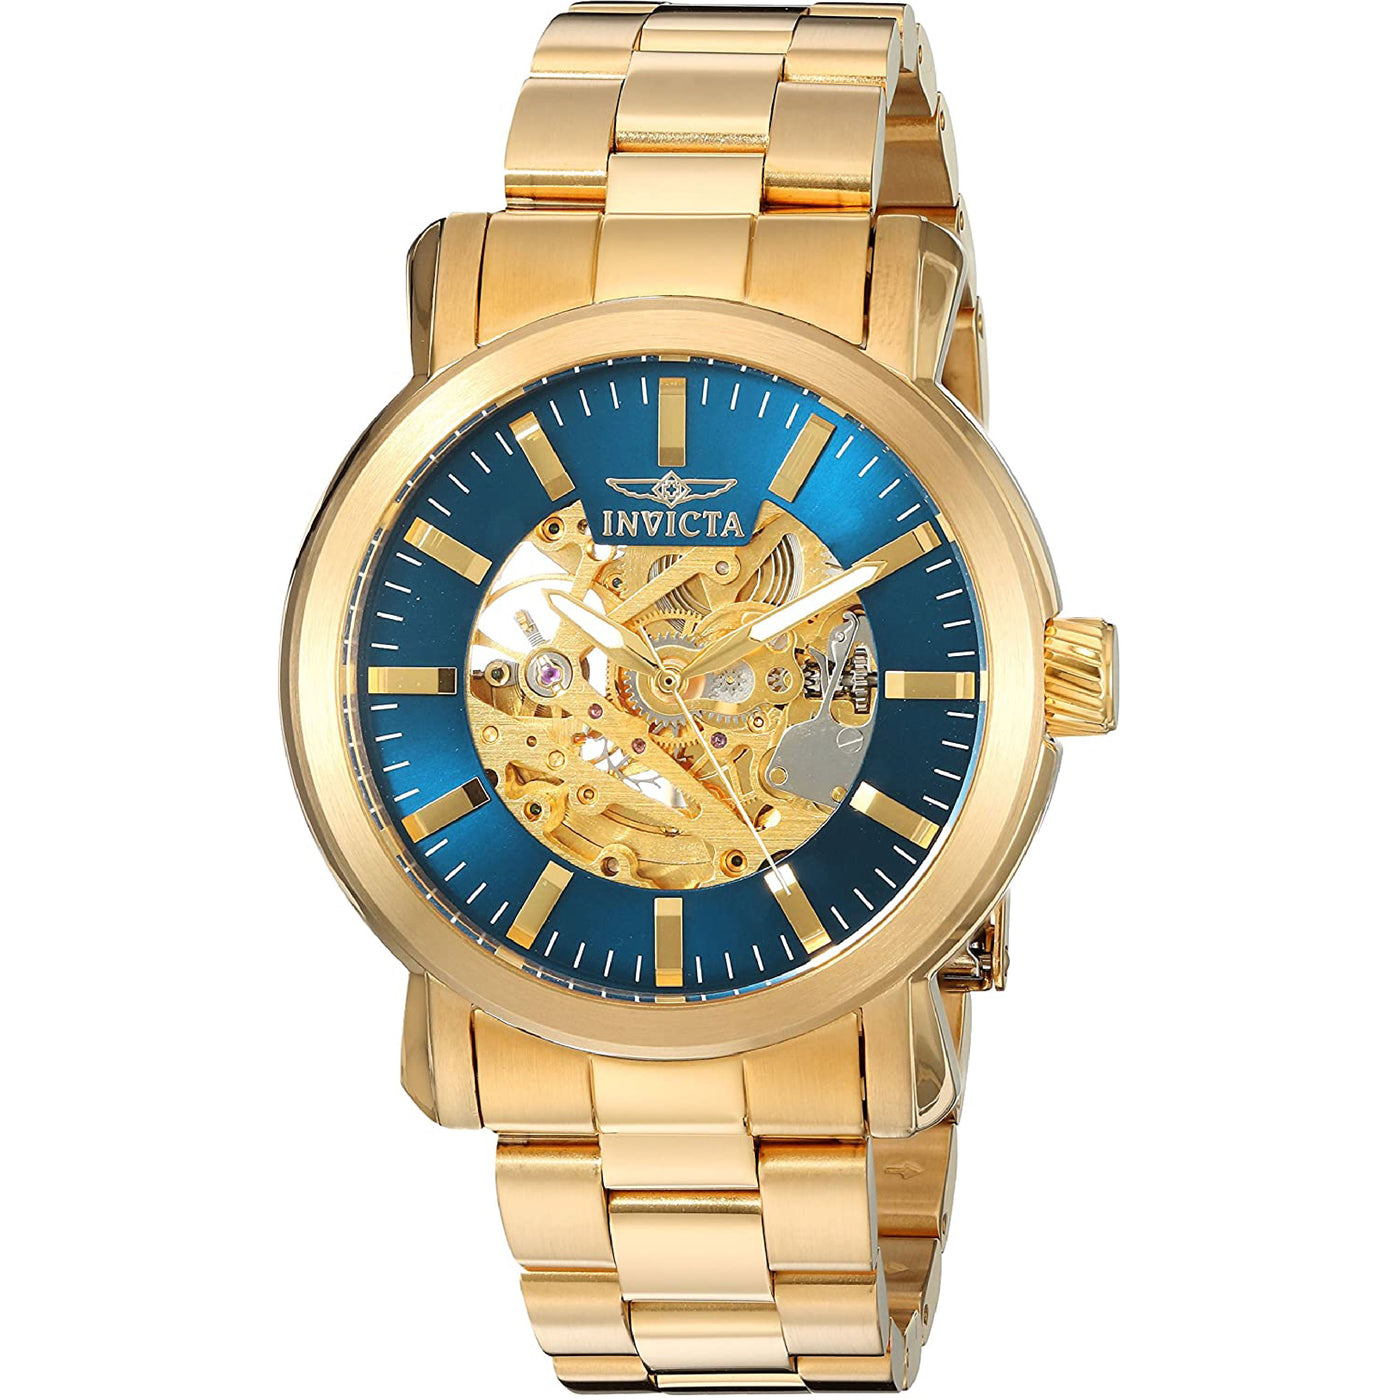 Invicta Men's 'Vintage' Automatic Stainless Steel and Leather 